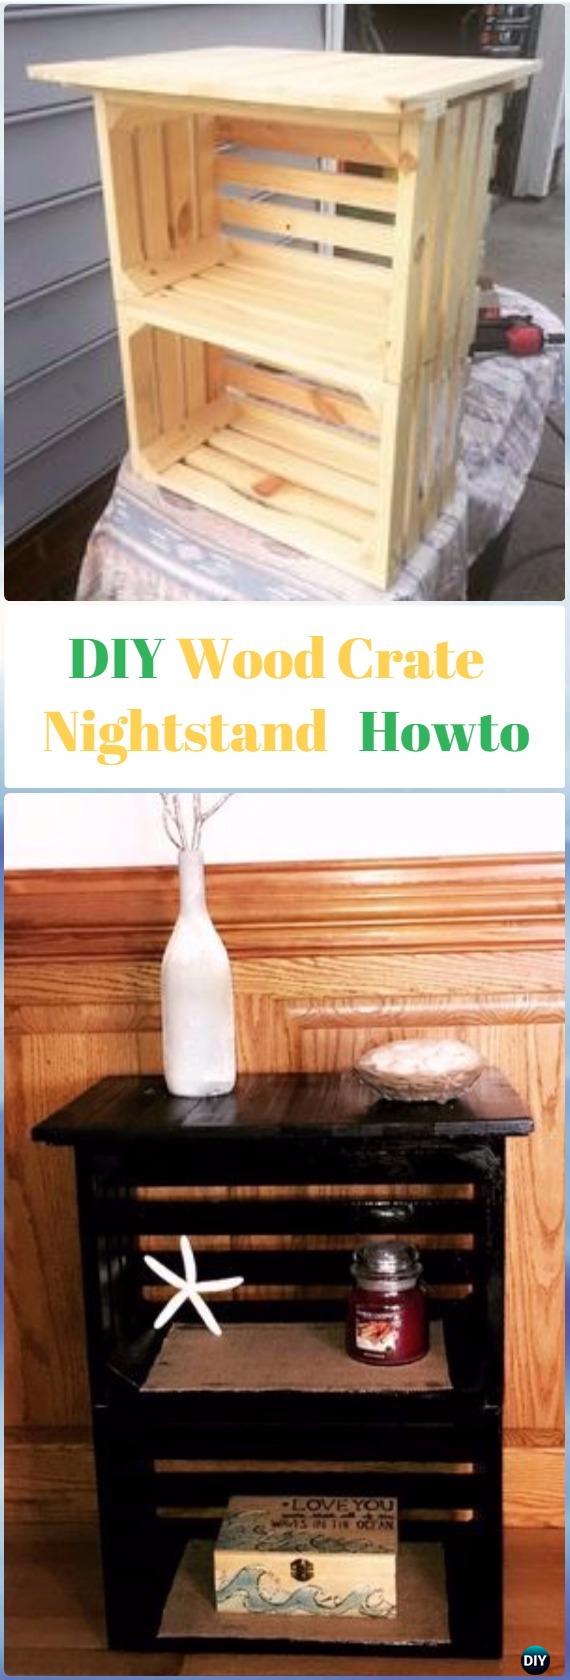 DIY Wood Crate Nightstand Instructions Video- DIY Wood Crate Furniture Ideas Projects